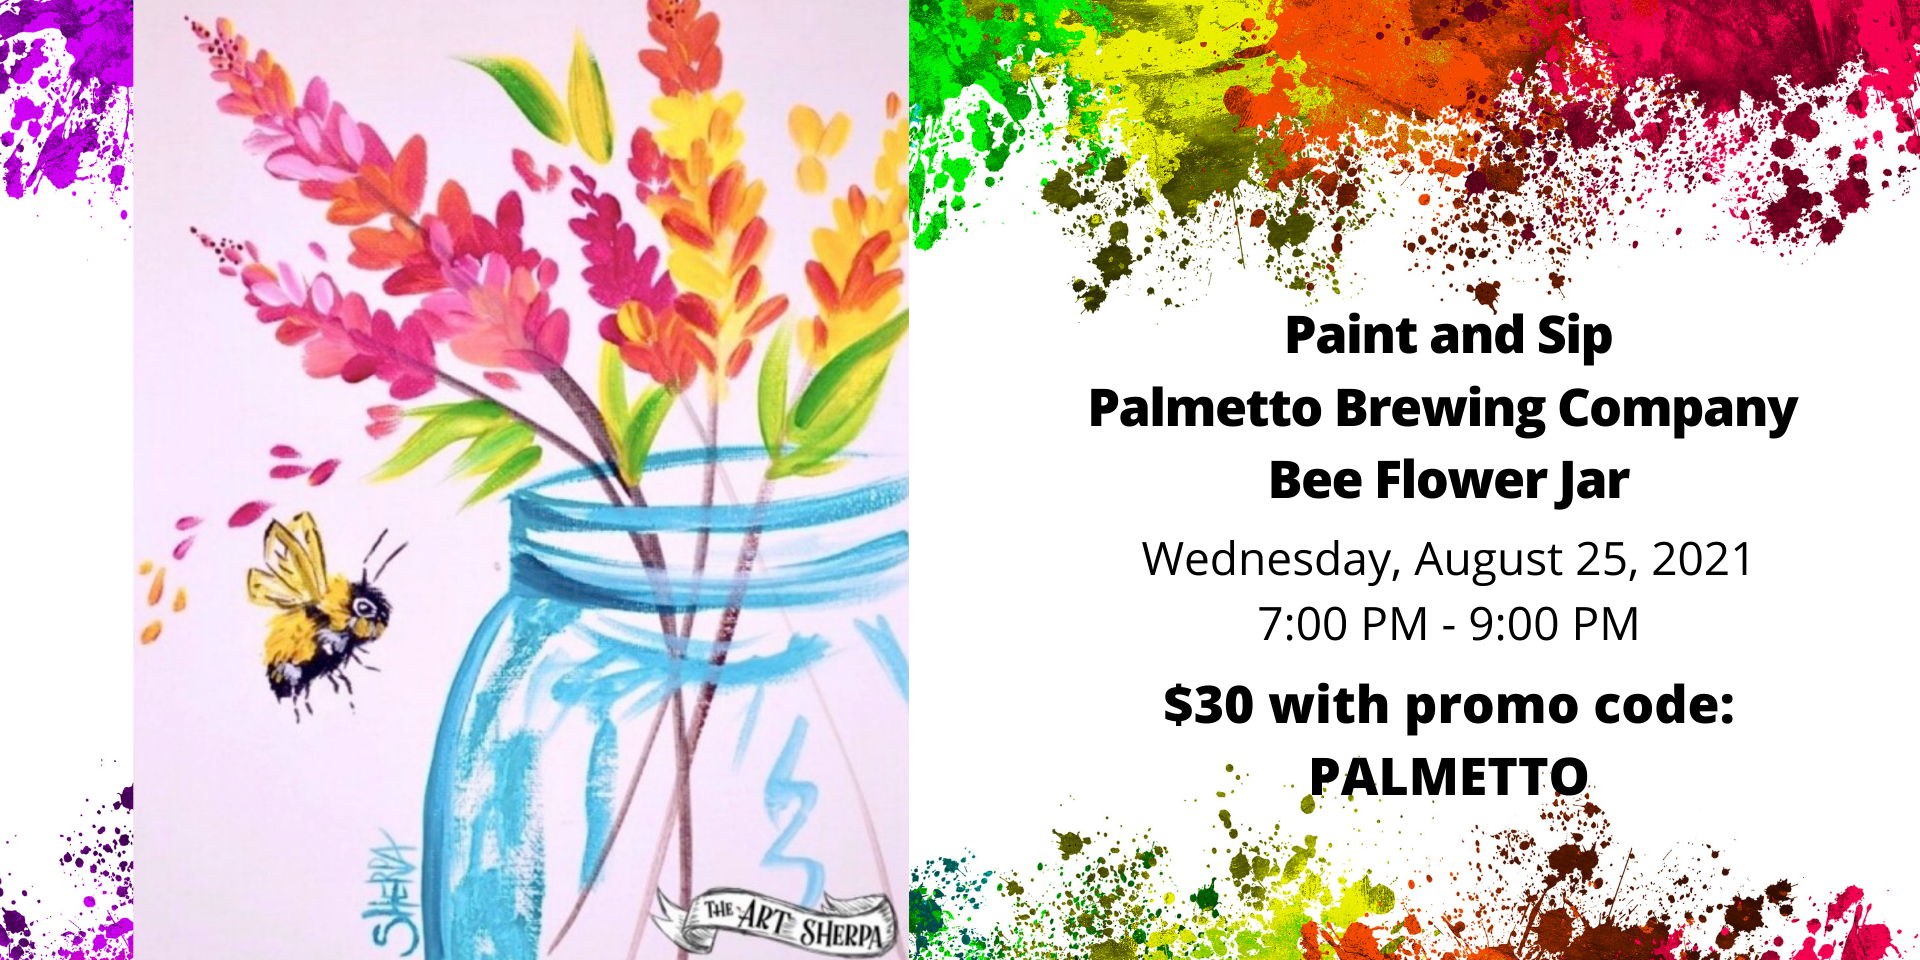 Paint and Sip @ Palmetto Brewing Co. promotional image